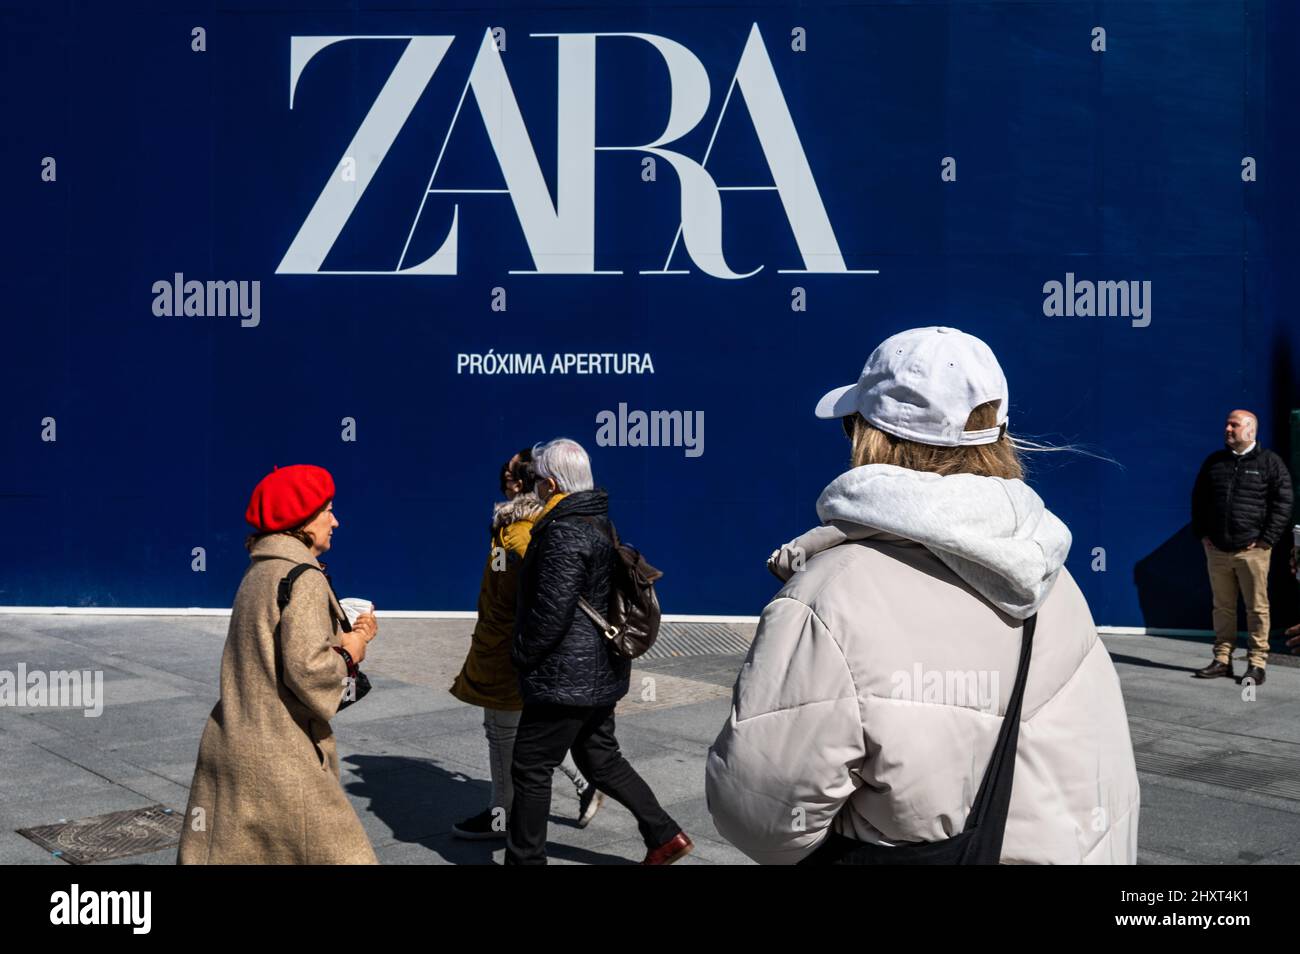 People walk past an advertisement for an upcoming opening of a Zara store.  Zara shops are part of Inditex group, owned by Amancio Ortega Stock Photo -  Alamy